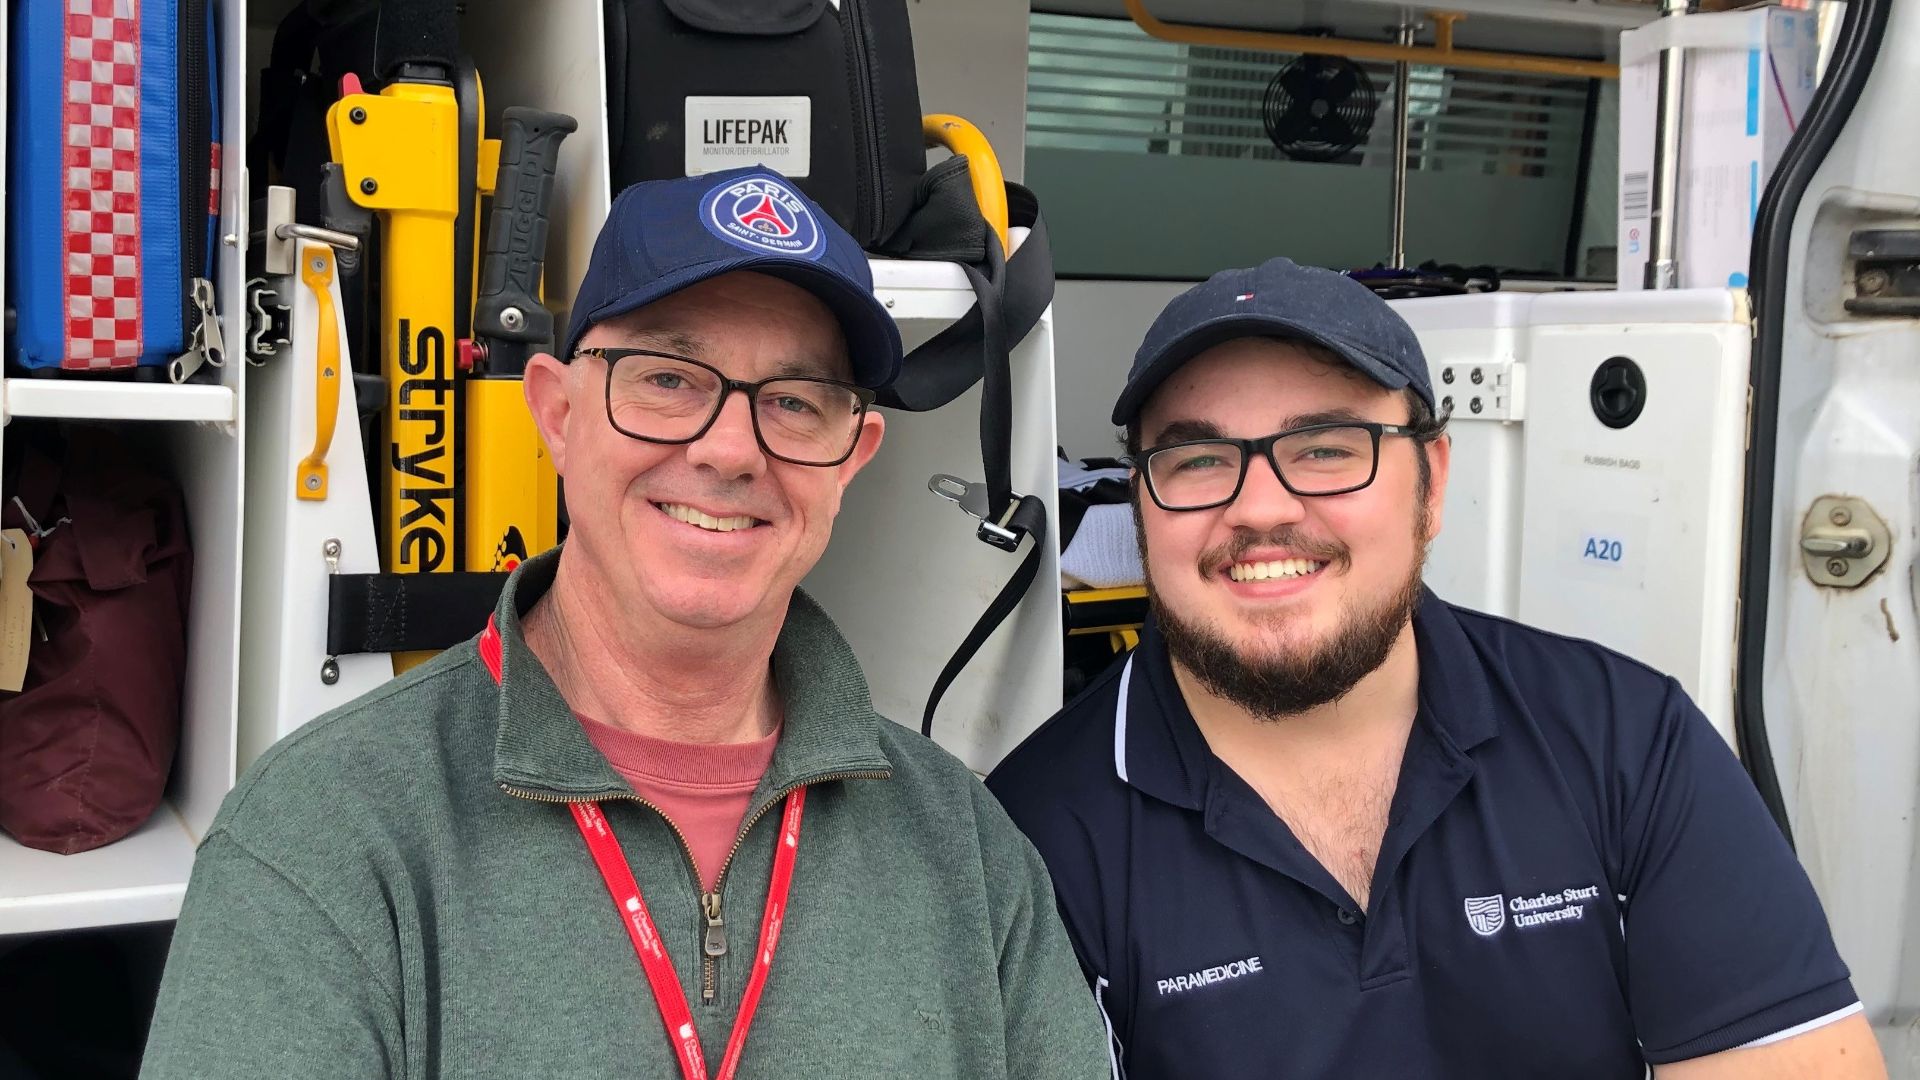 It’s all in the family for paramedic father and son